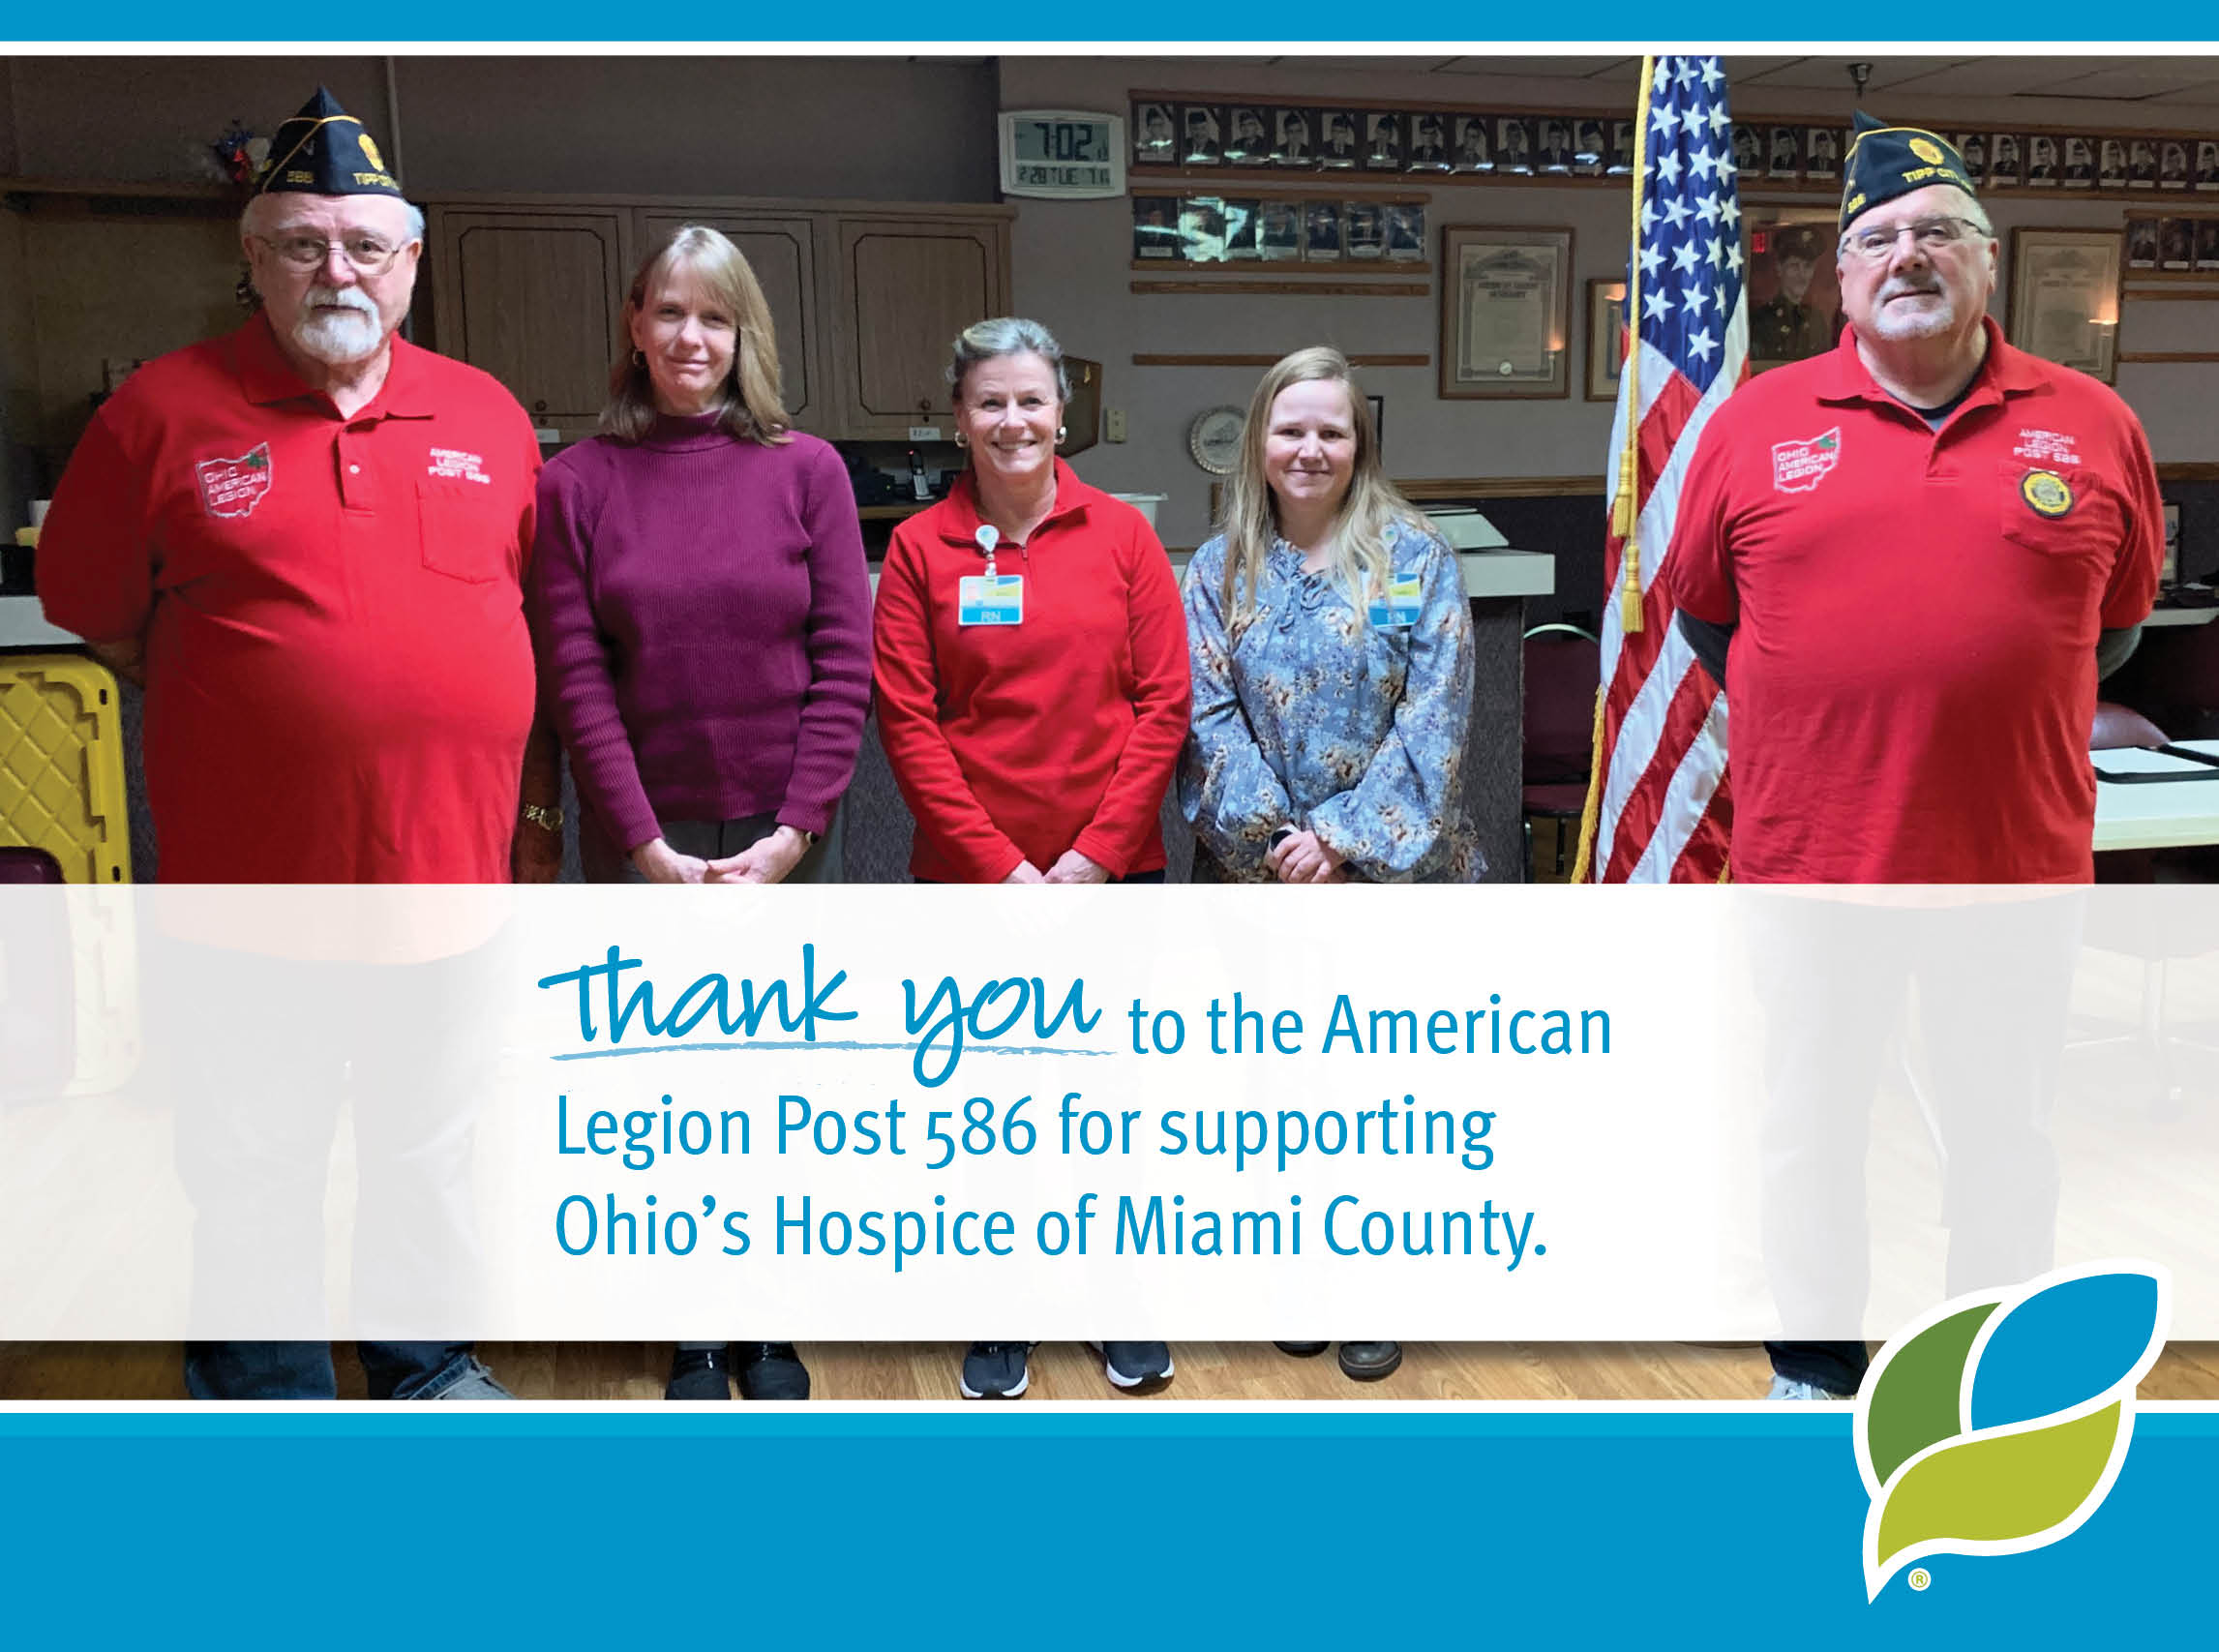 Thank yuo to the American Legion Post 586 for supporting Ohio's Hospice of Miami County